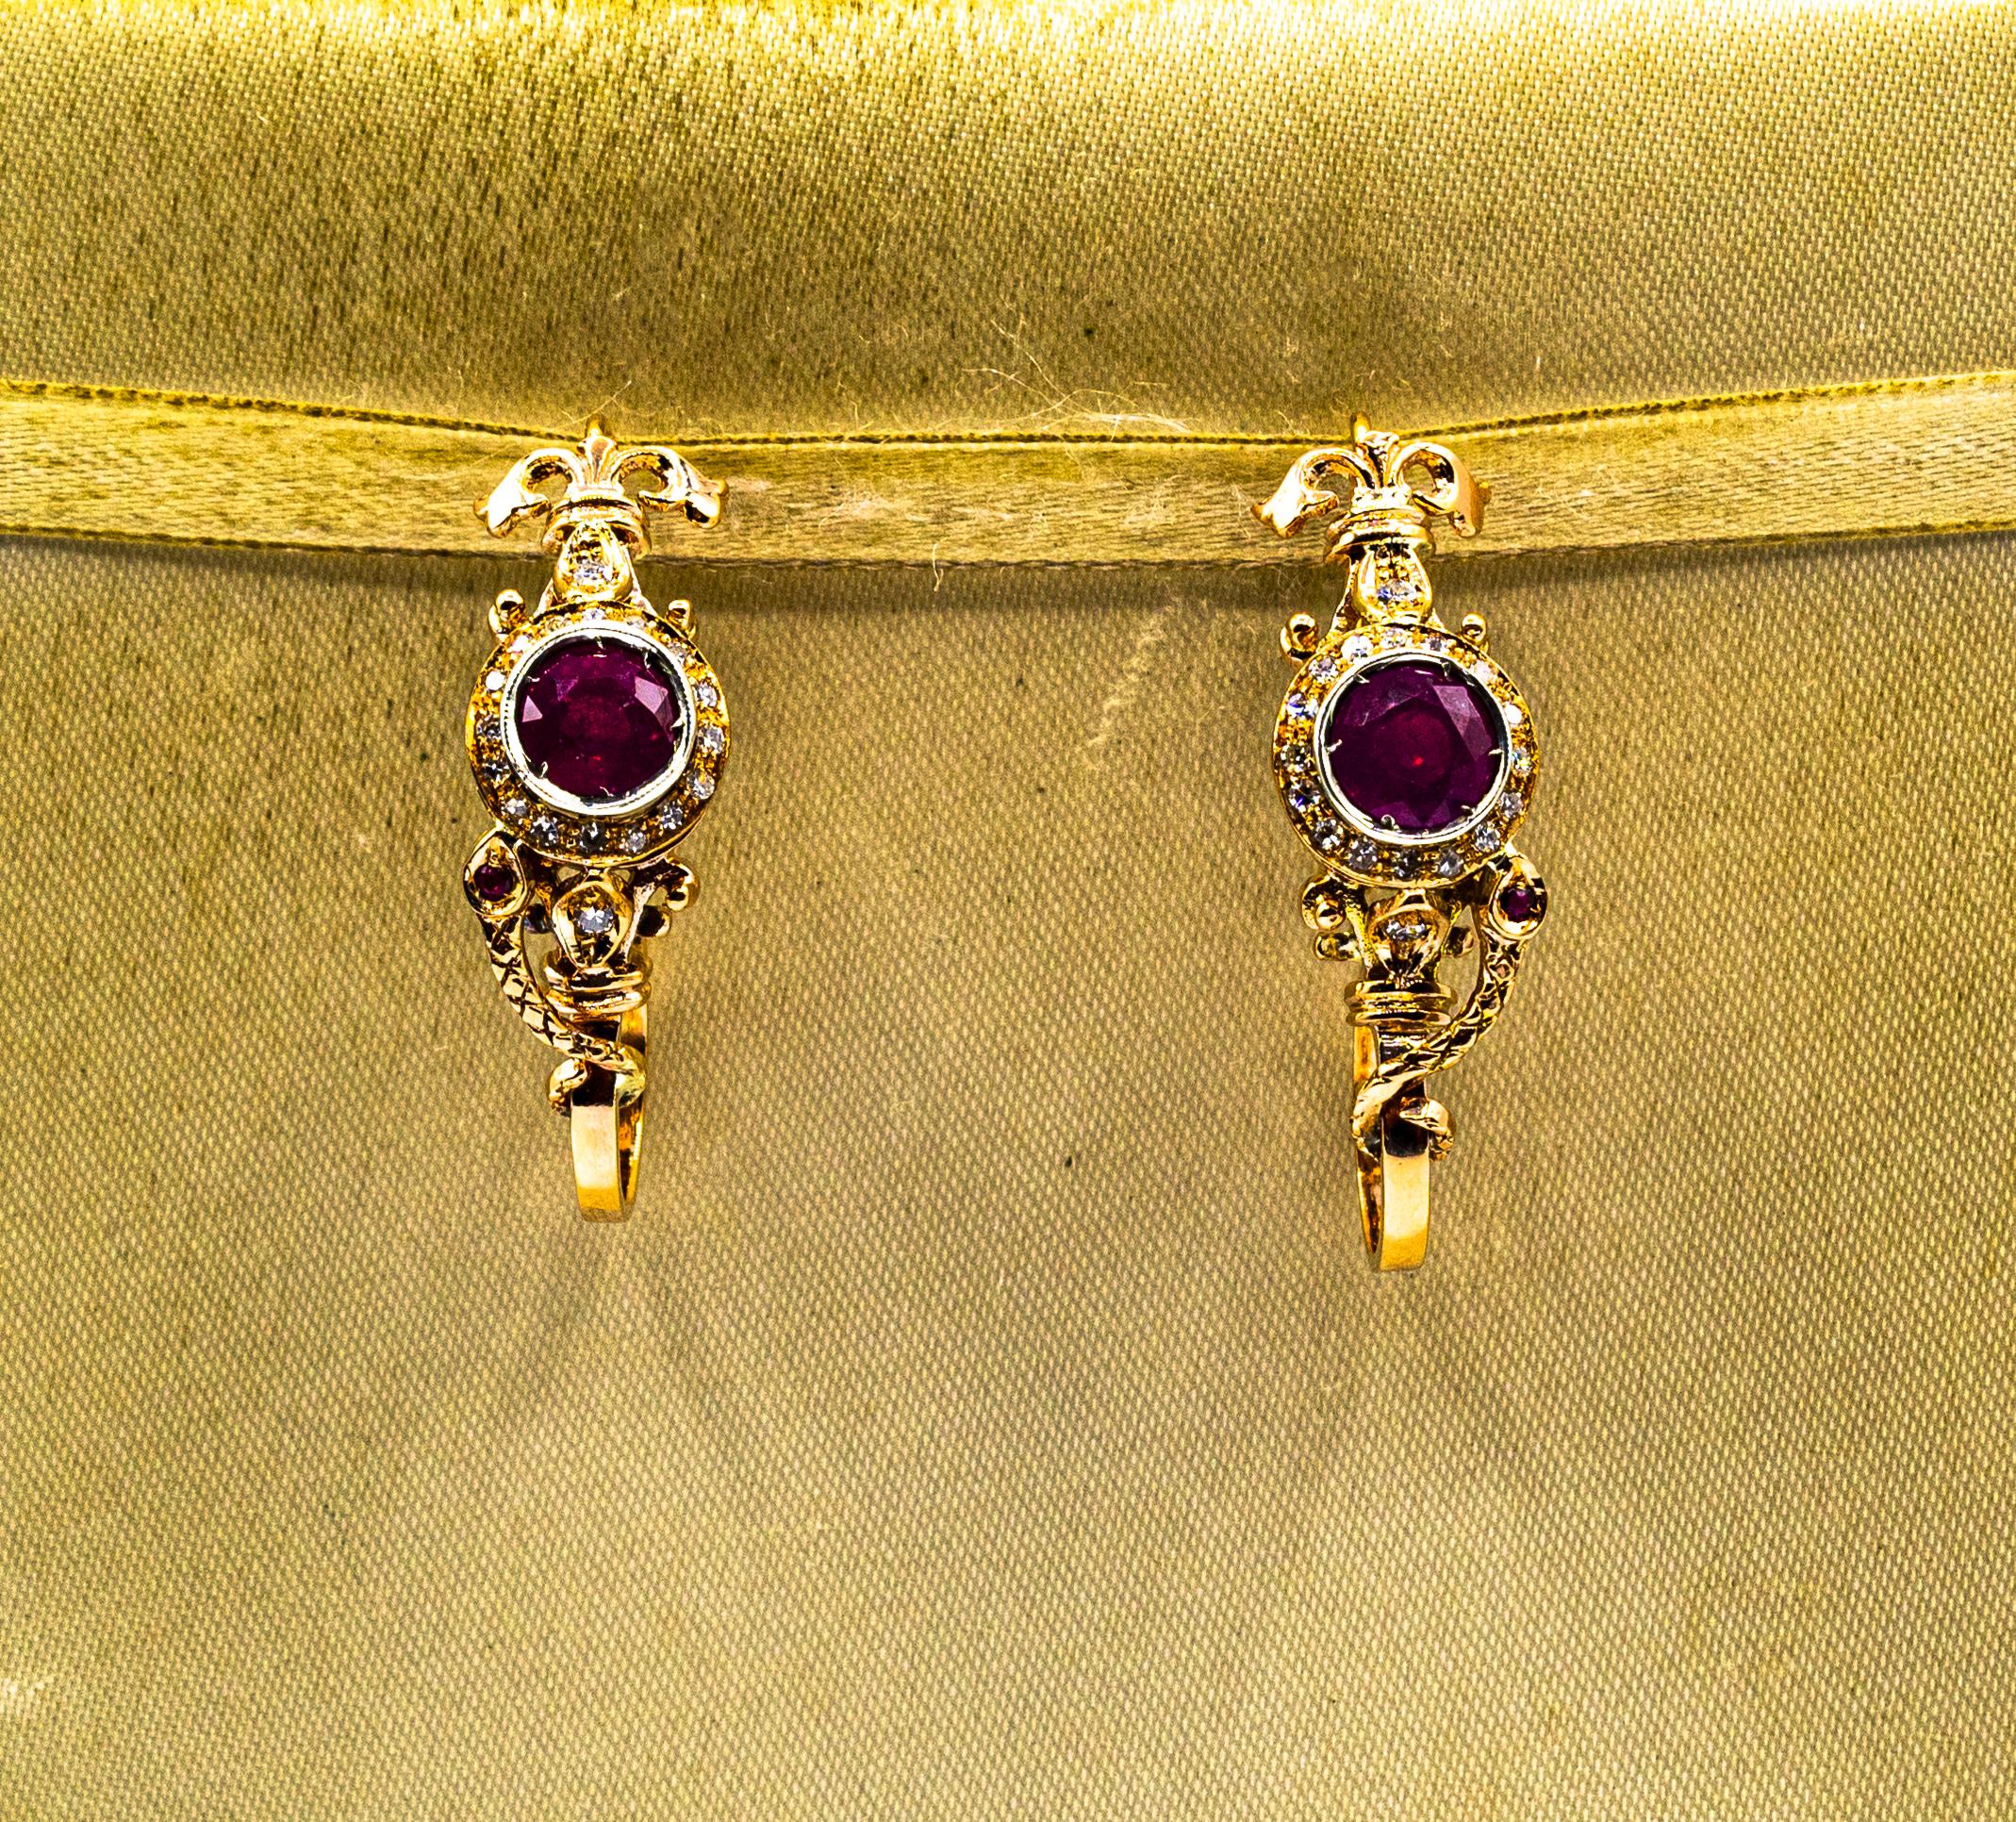 These Earrings are made of 9K Yellow Gold and Sterling Silver.
These Earrings have 0.40 Carats of White Brilliant Cut Diamonds.
These Earrings have also 3.41 Carats of Rubies.

These Earrings are available also with Emeralds or Blue Sapphires.

All